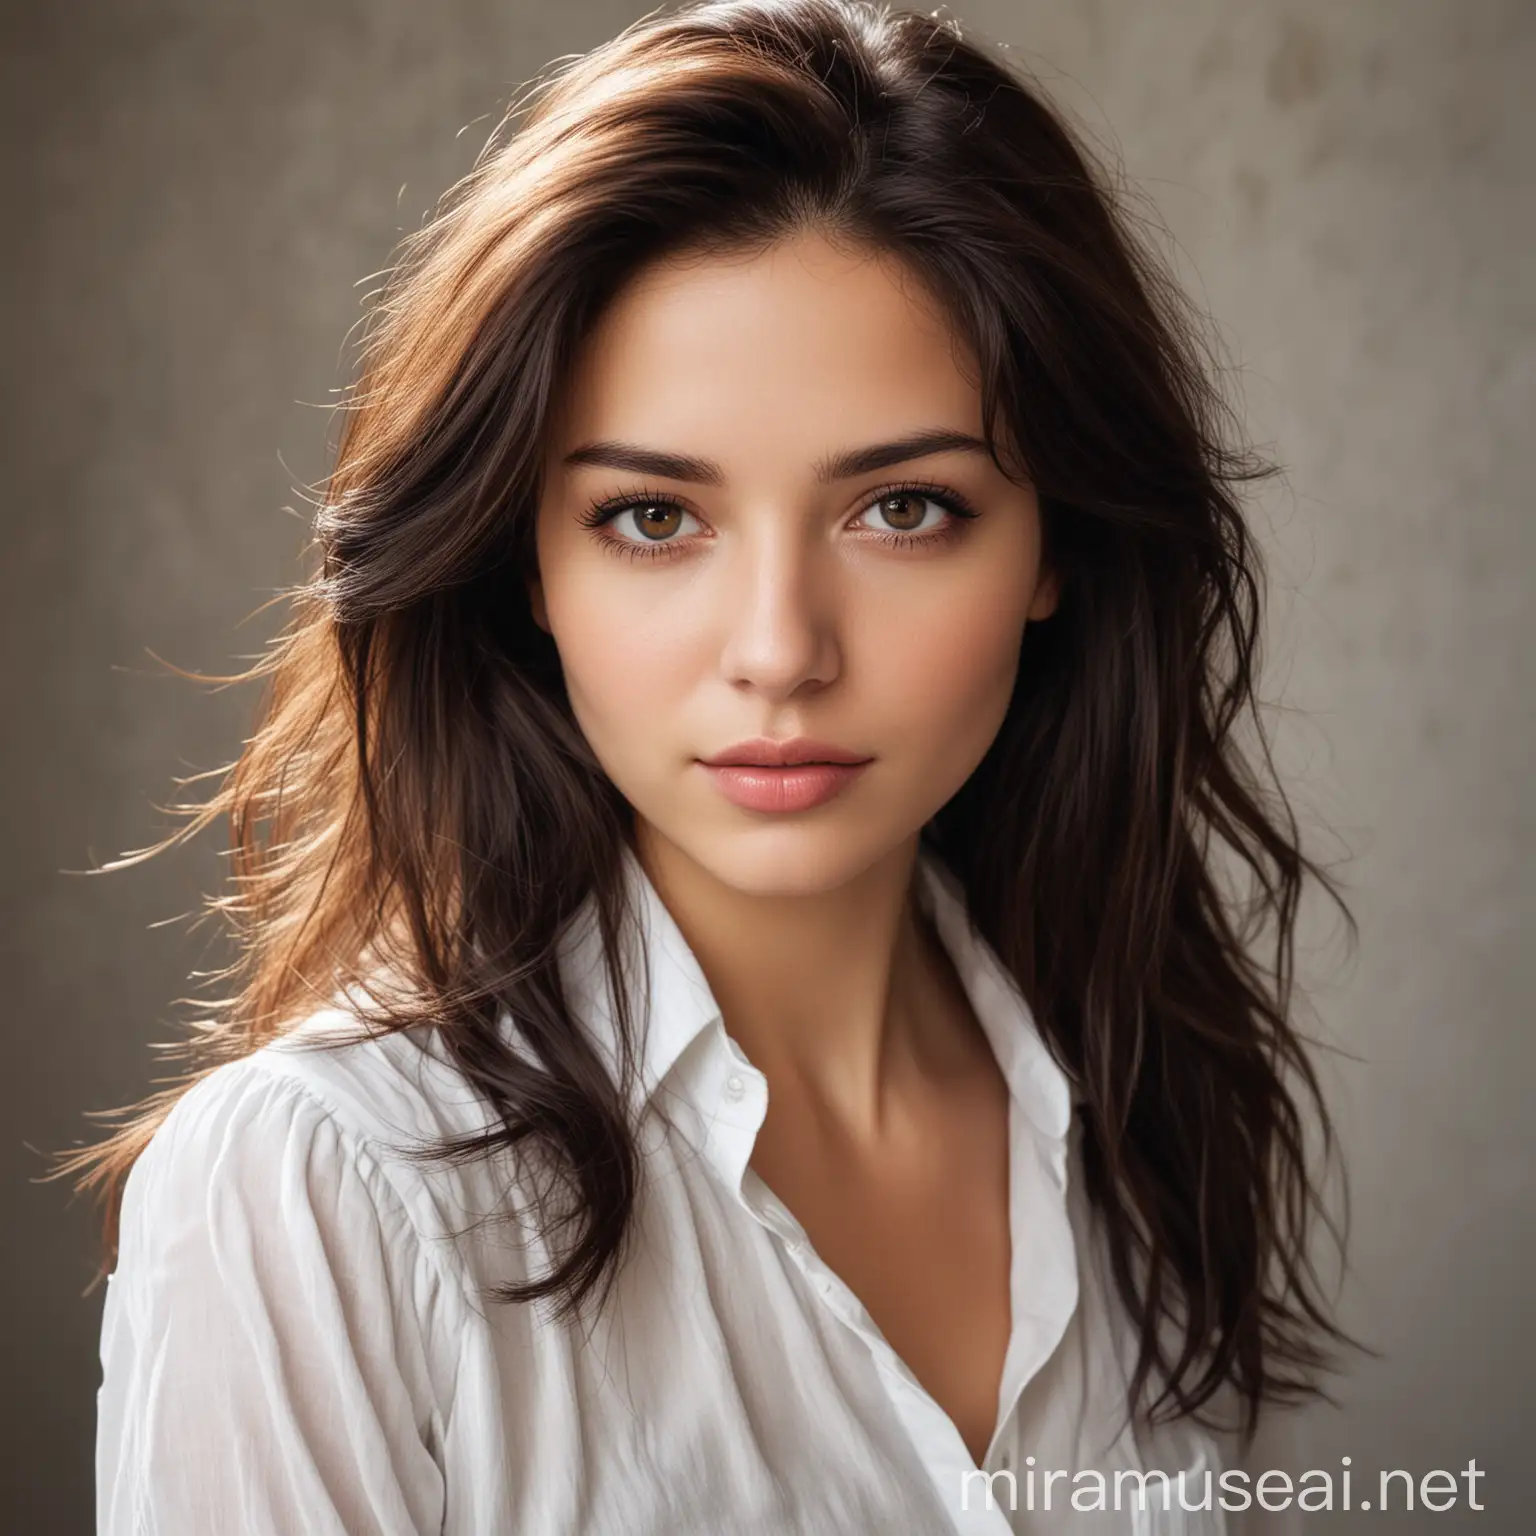 Elegant Woman with Dark Brown Hair and White Blouse in Radiant Light